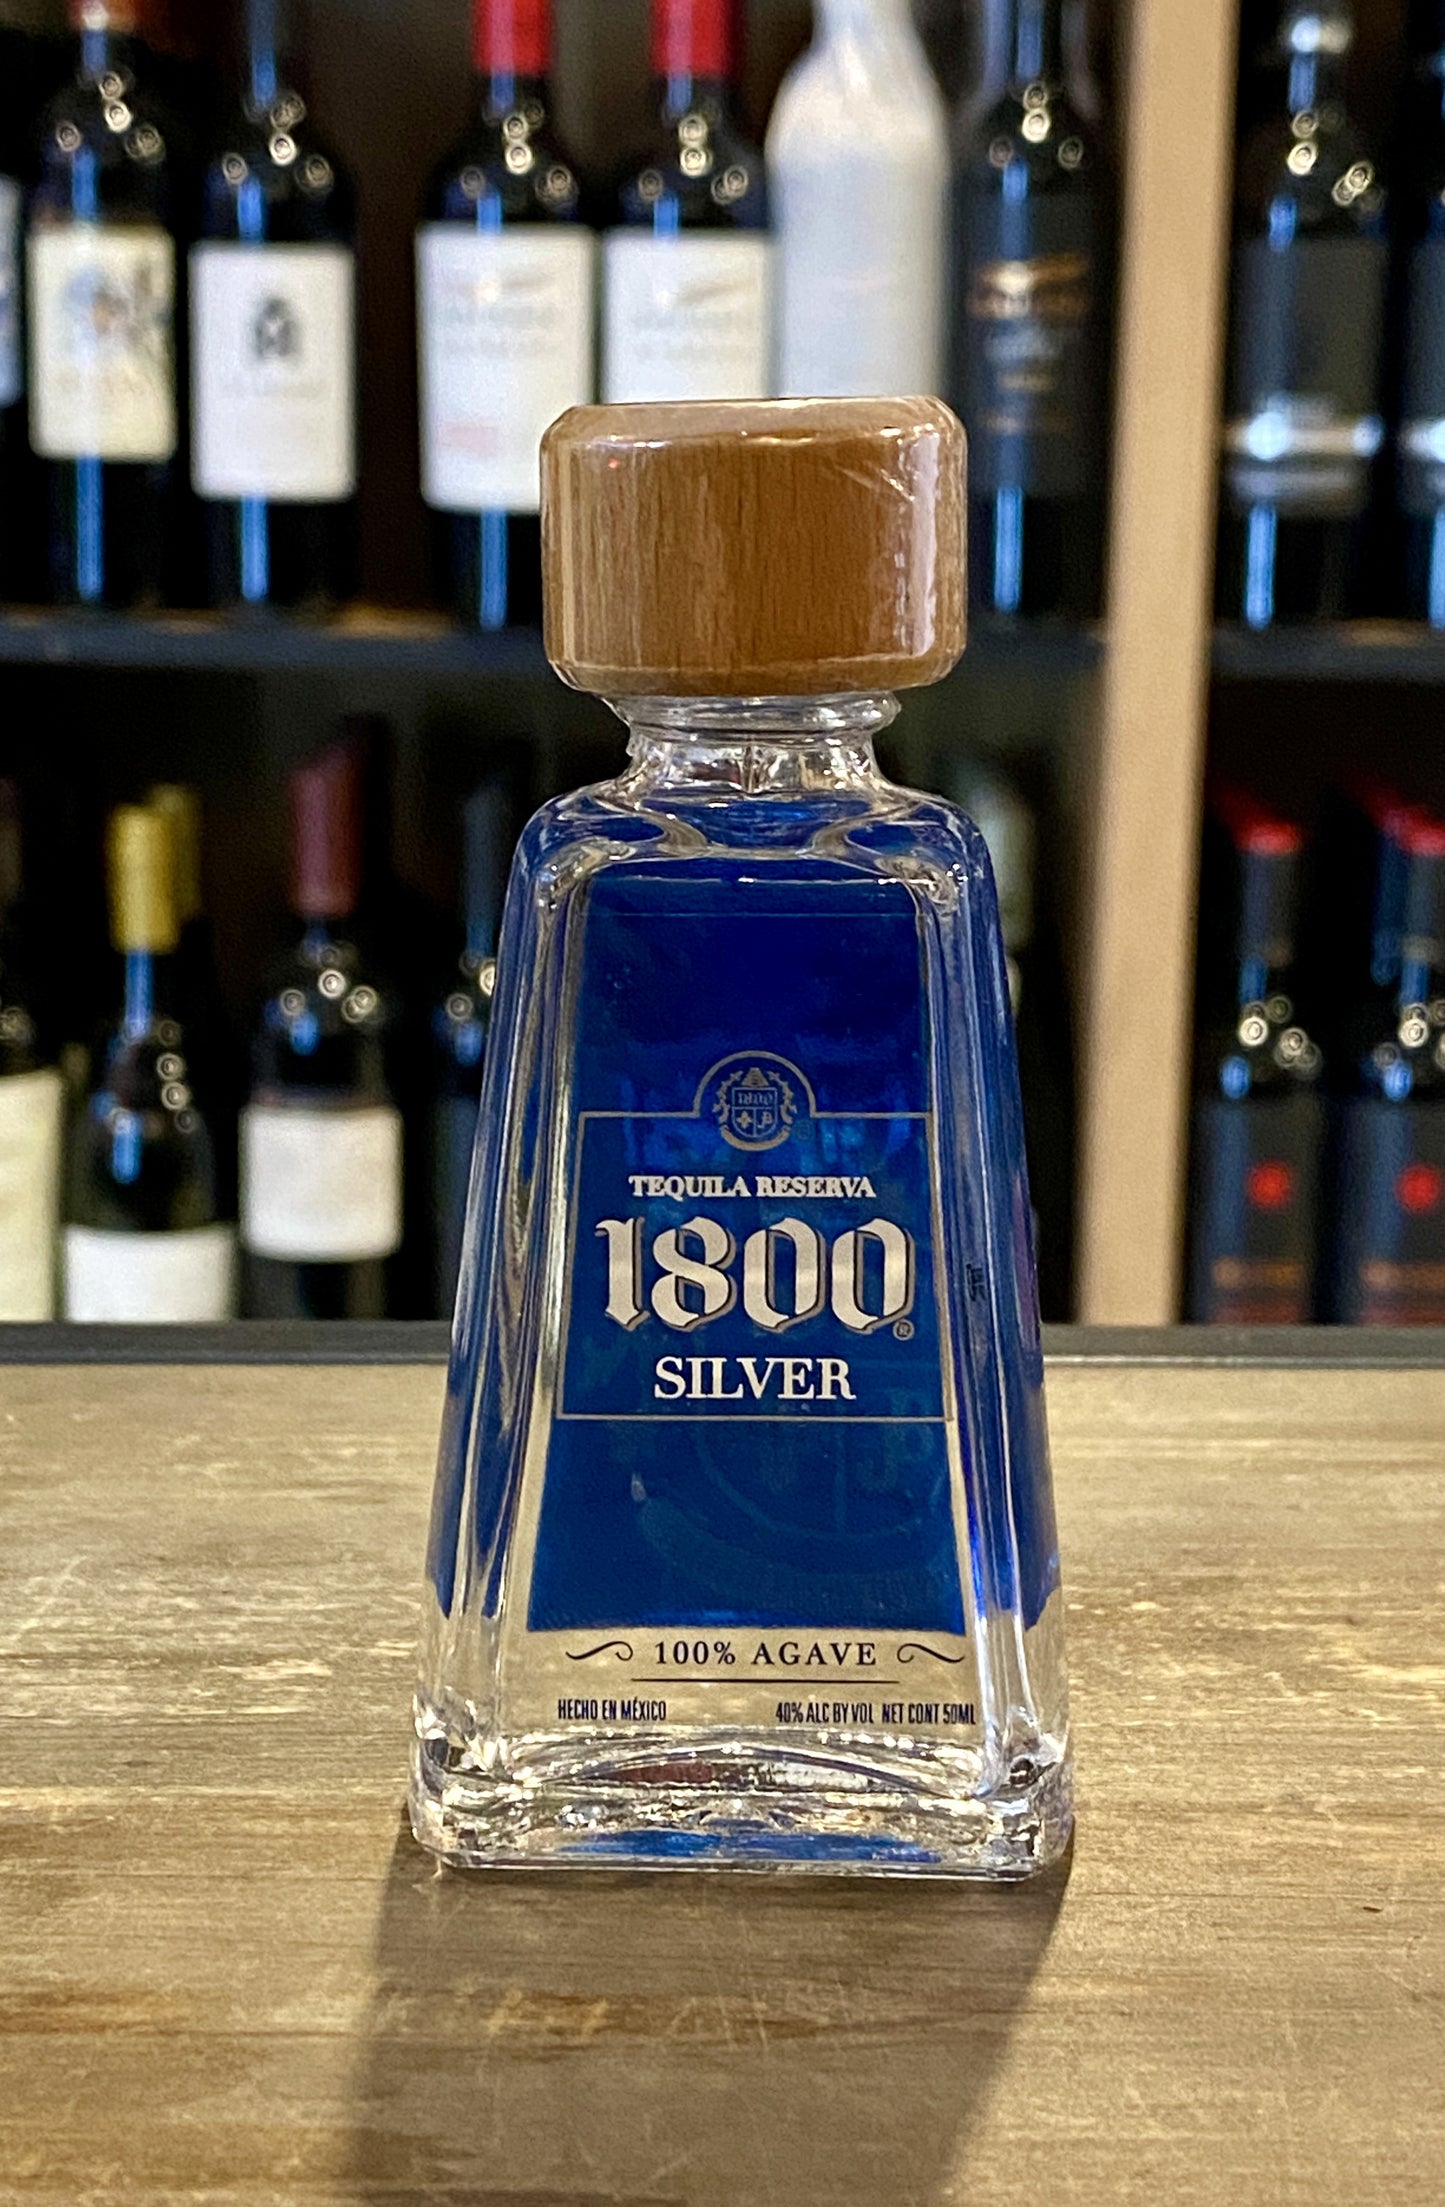 A smooth and a supple entry with a round medium bodied palate with sweet prune and roasted pepper. The colour is pale yellow diamond.1800 Silver Tequila has a distinct aroma of agave, roasted peppers, spice and black peppercorns. It has a long sweet and fruity pepper fade finish.